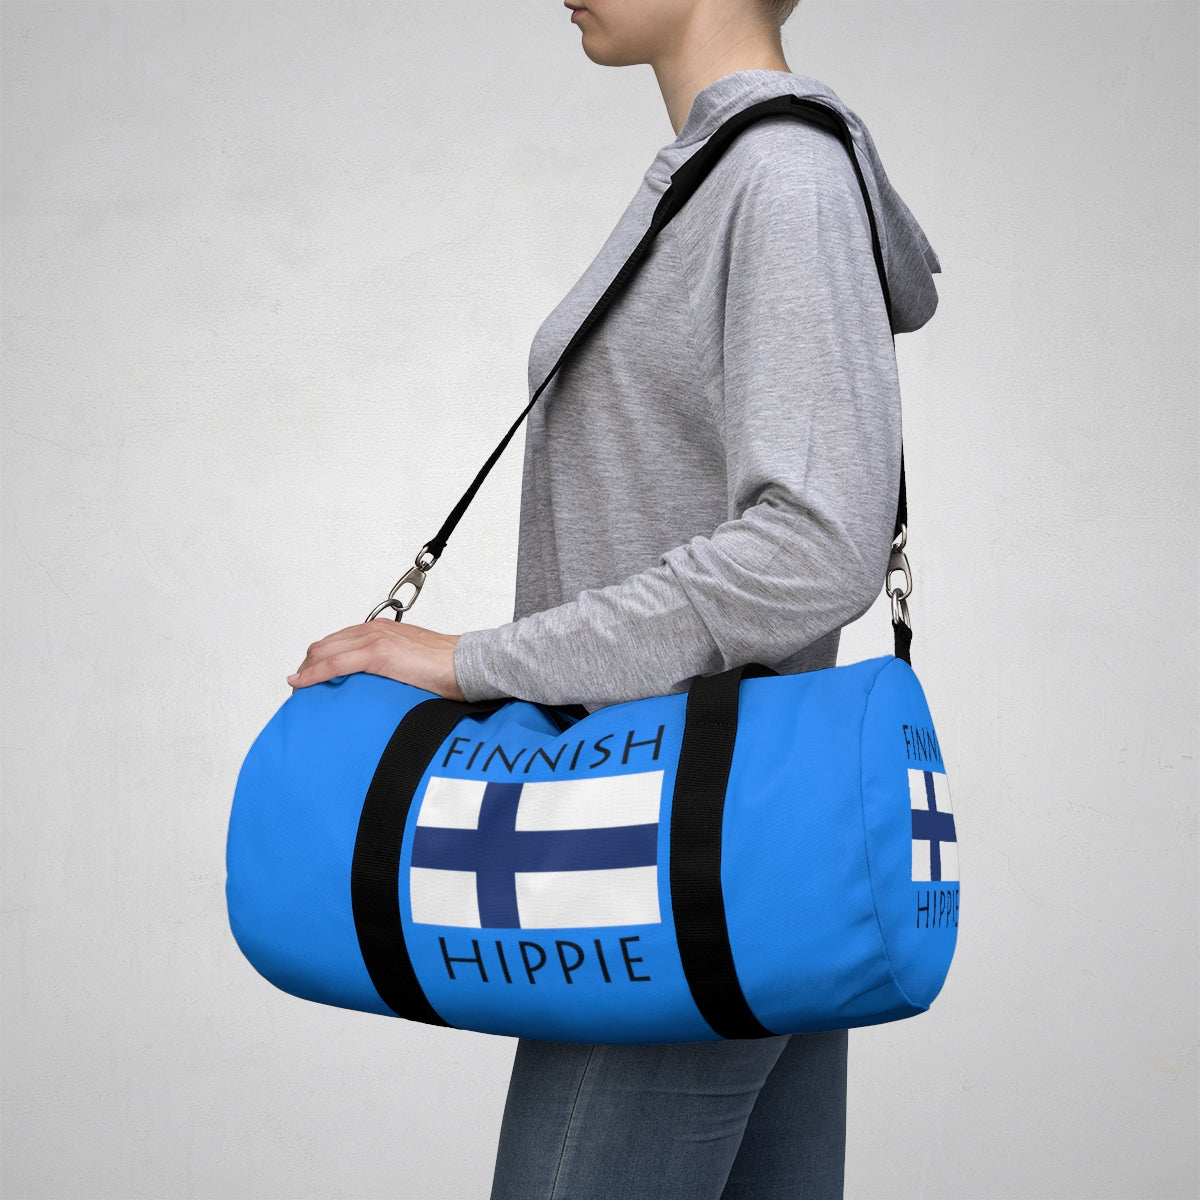 Stately Wear's Finnish Flag Hippie duffel bag is colorful, iconic and Boho stylish. We are a Katie Couric Shop partner. This duffel bag is the perfect accessory as a beach bag, ski bag, travel bag, shopping bag & gym bag, Pilates bag or yoga bag. Custom made one-at-a-time with environmentally friendly biodegradable inks & dyes. 2 sizes to choose. Stately Wear's bags are very durable, soft and colorful duffels with durable strap.